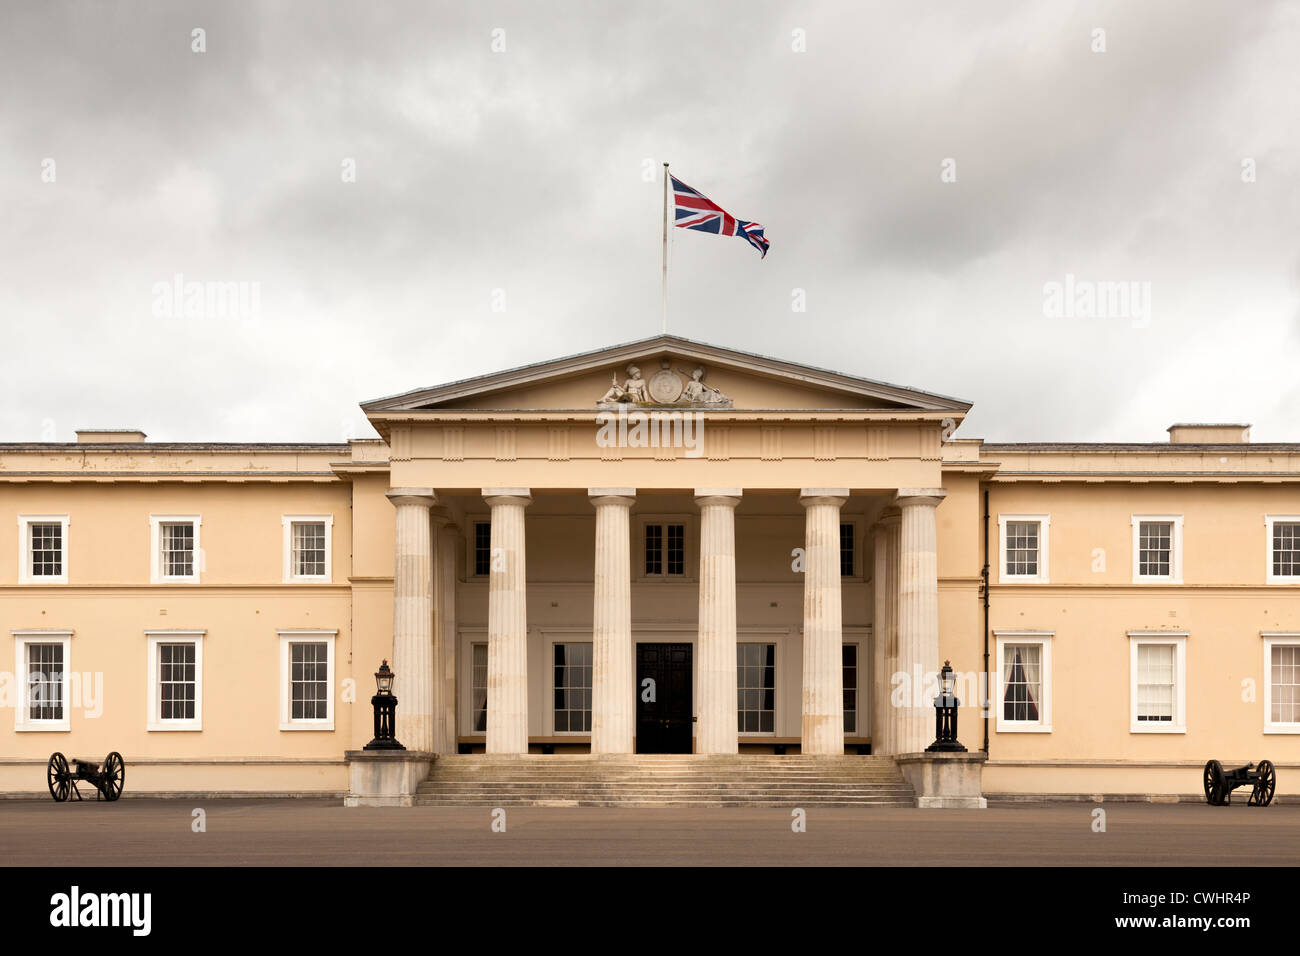 front facade of Old College Building Royal Military Academy Sandhurst Stock Photo